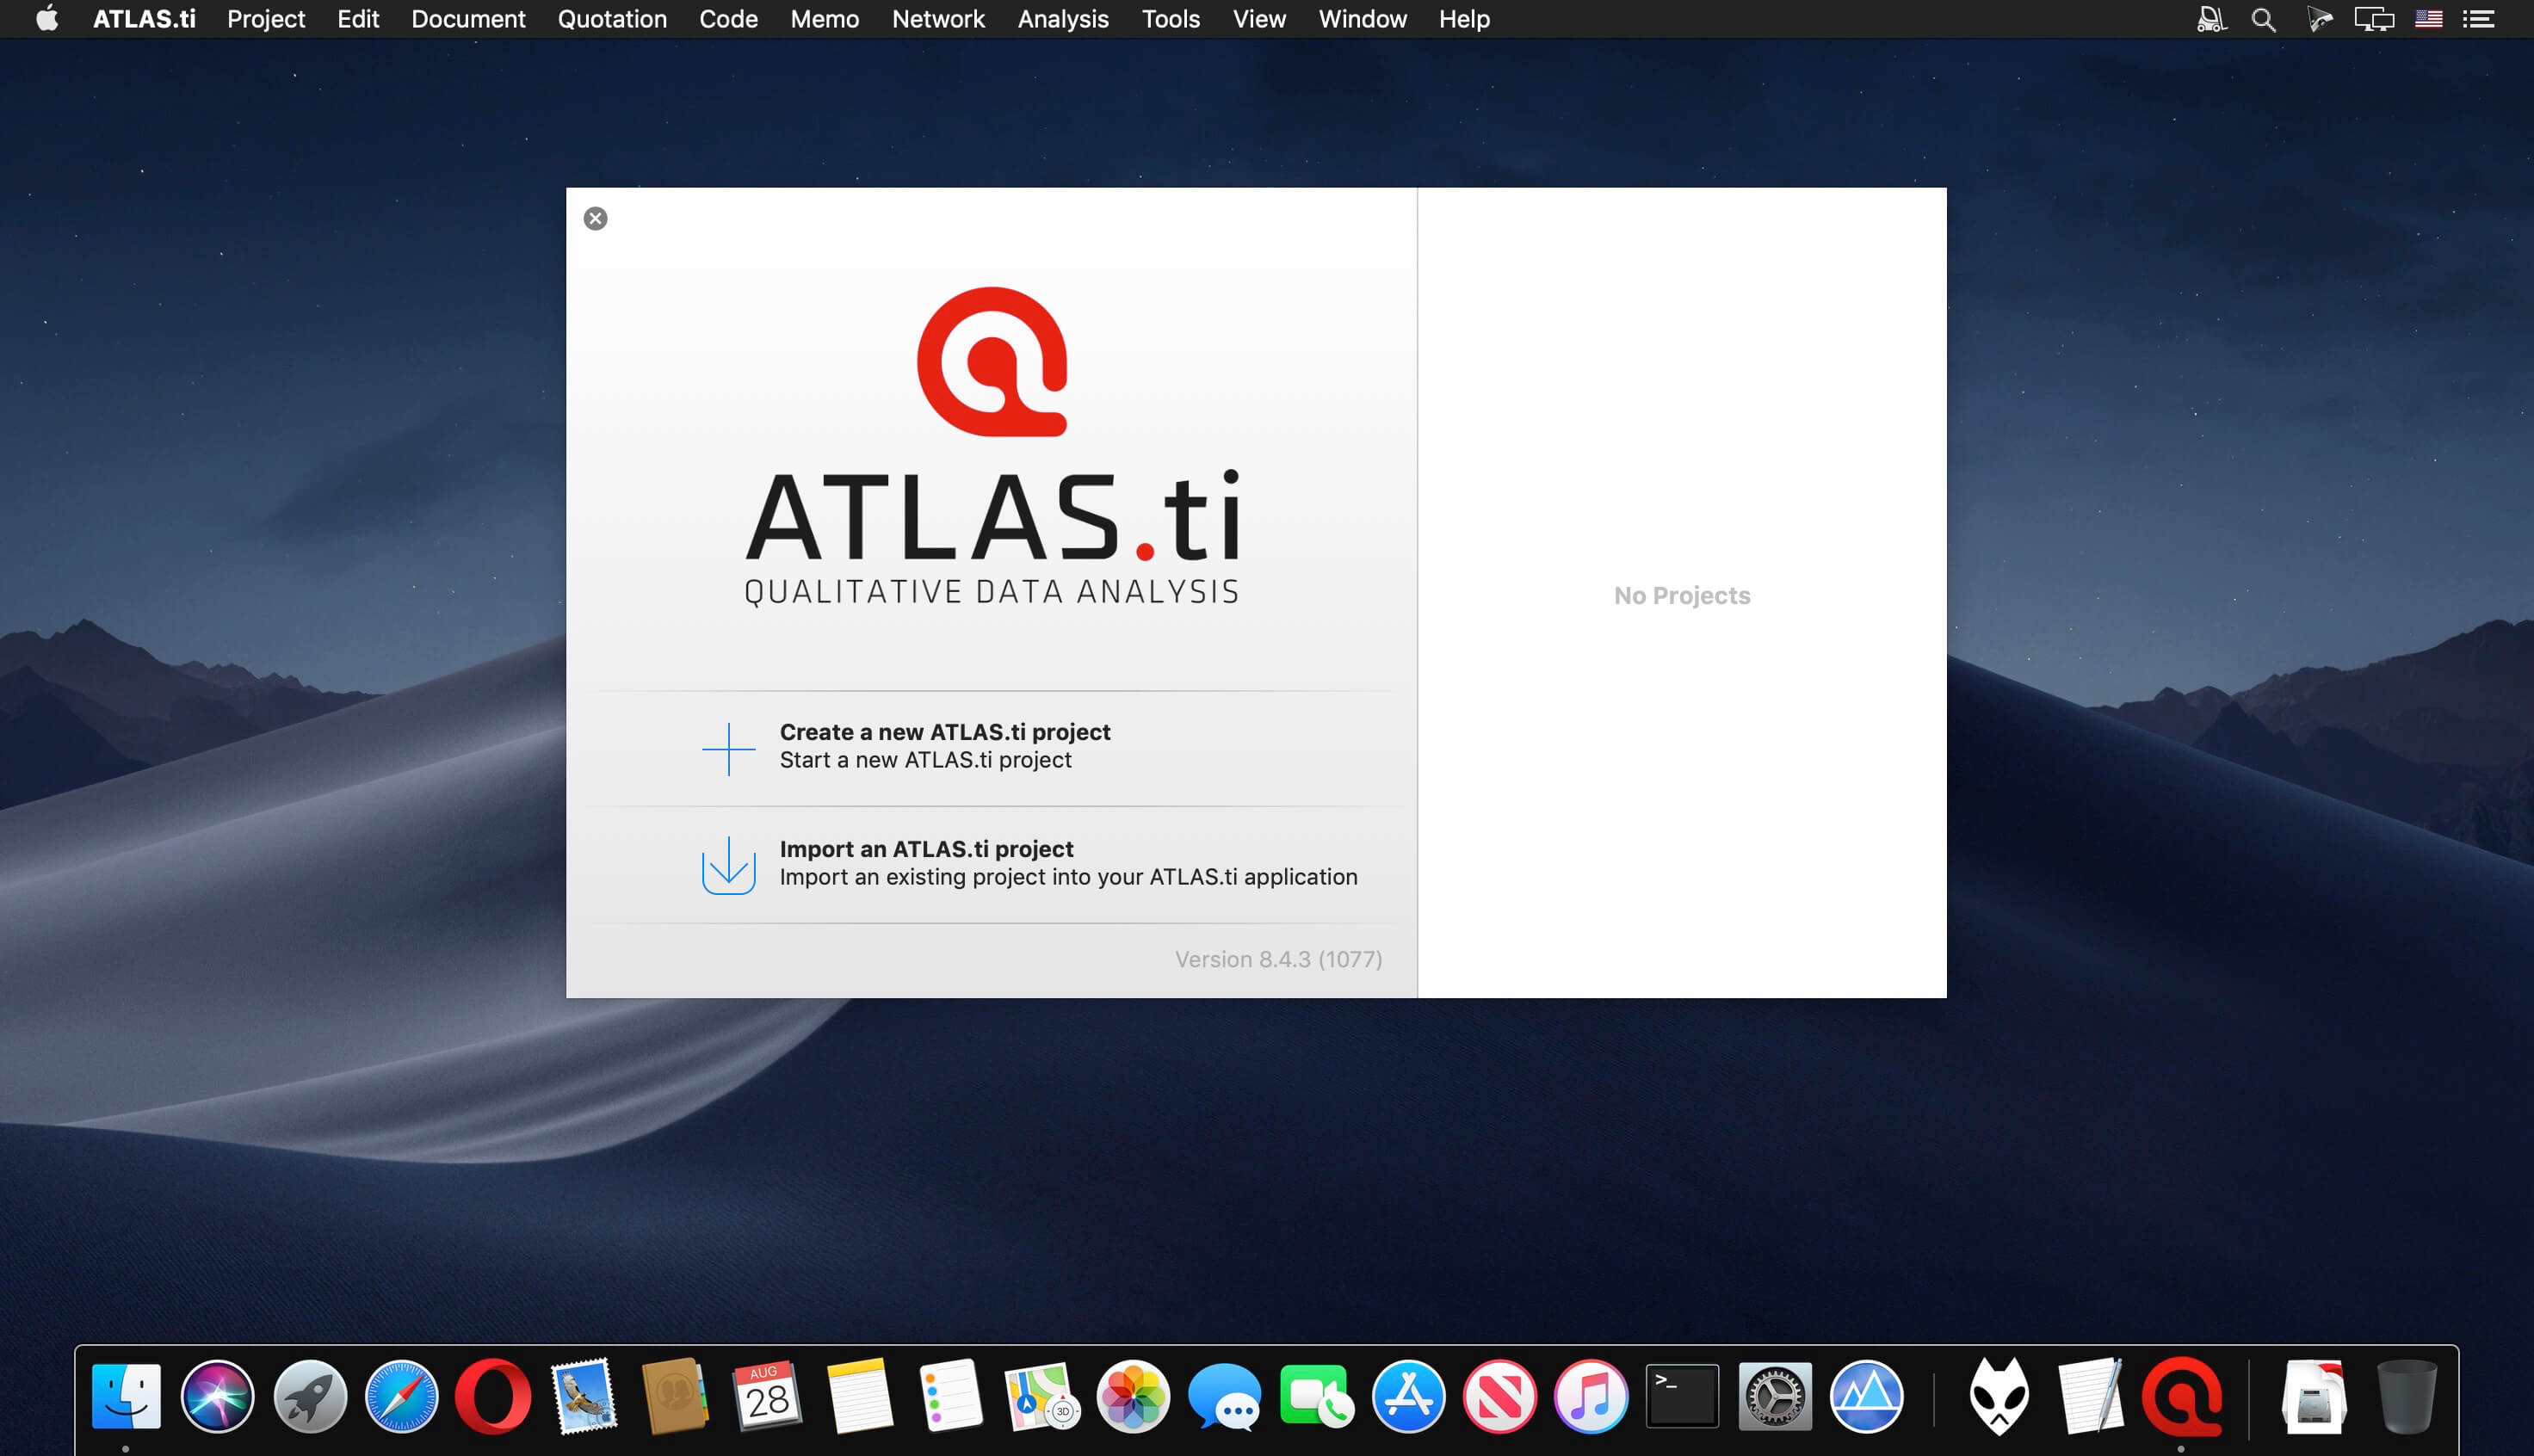 download the new for apple Star Atlas